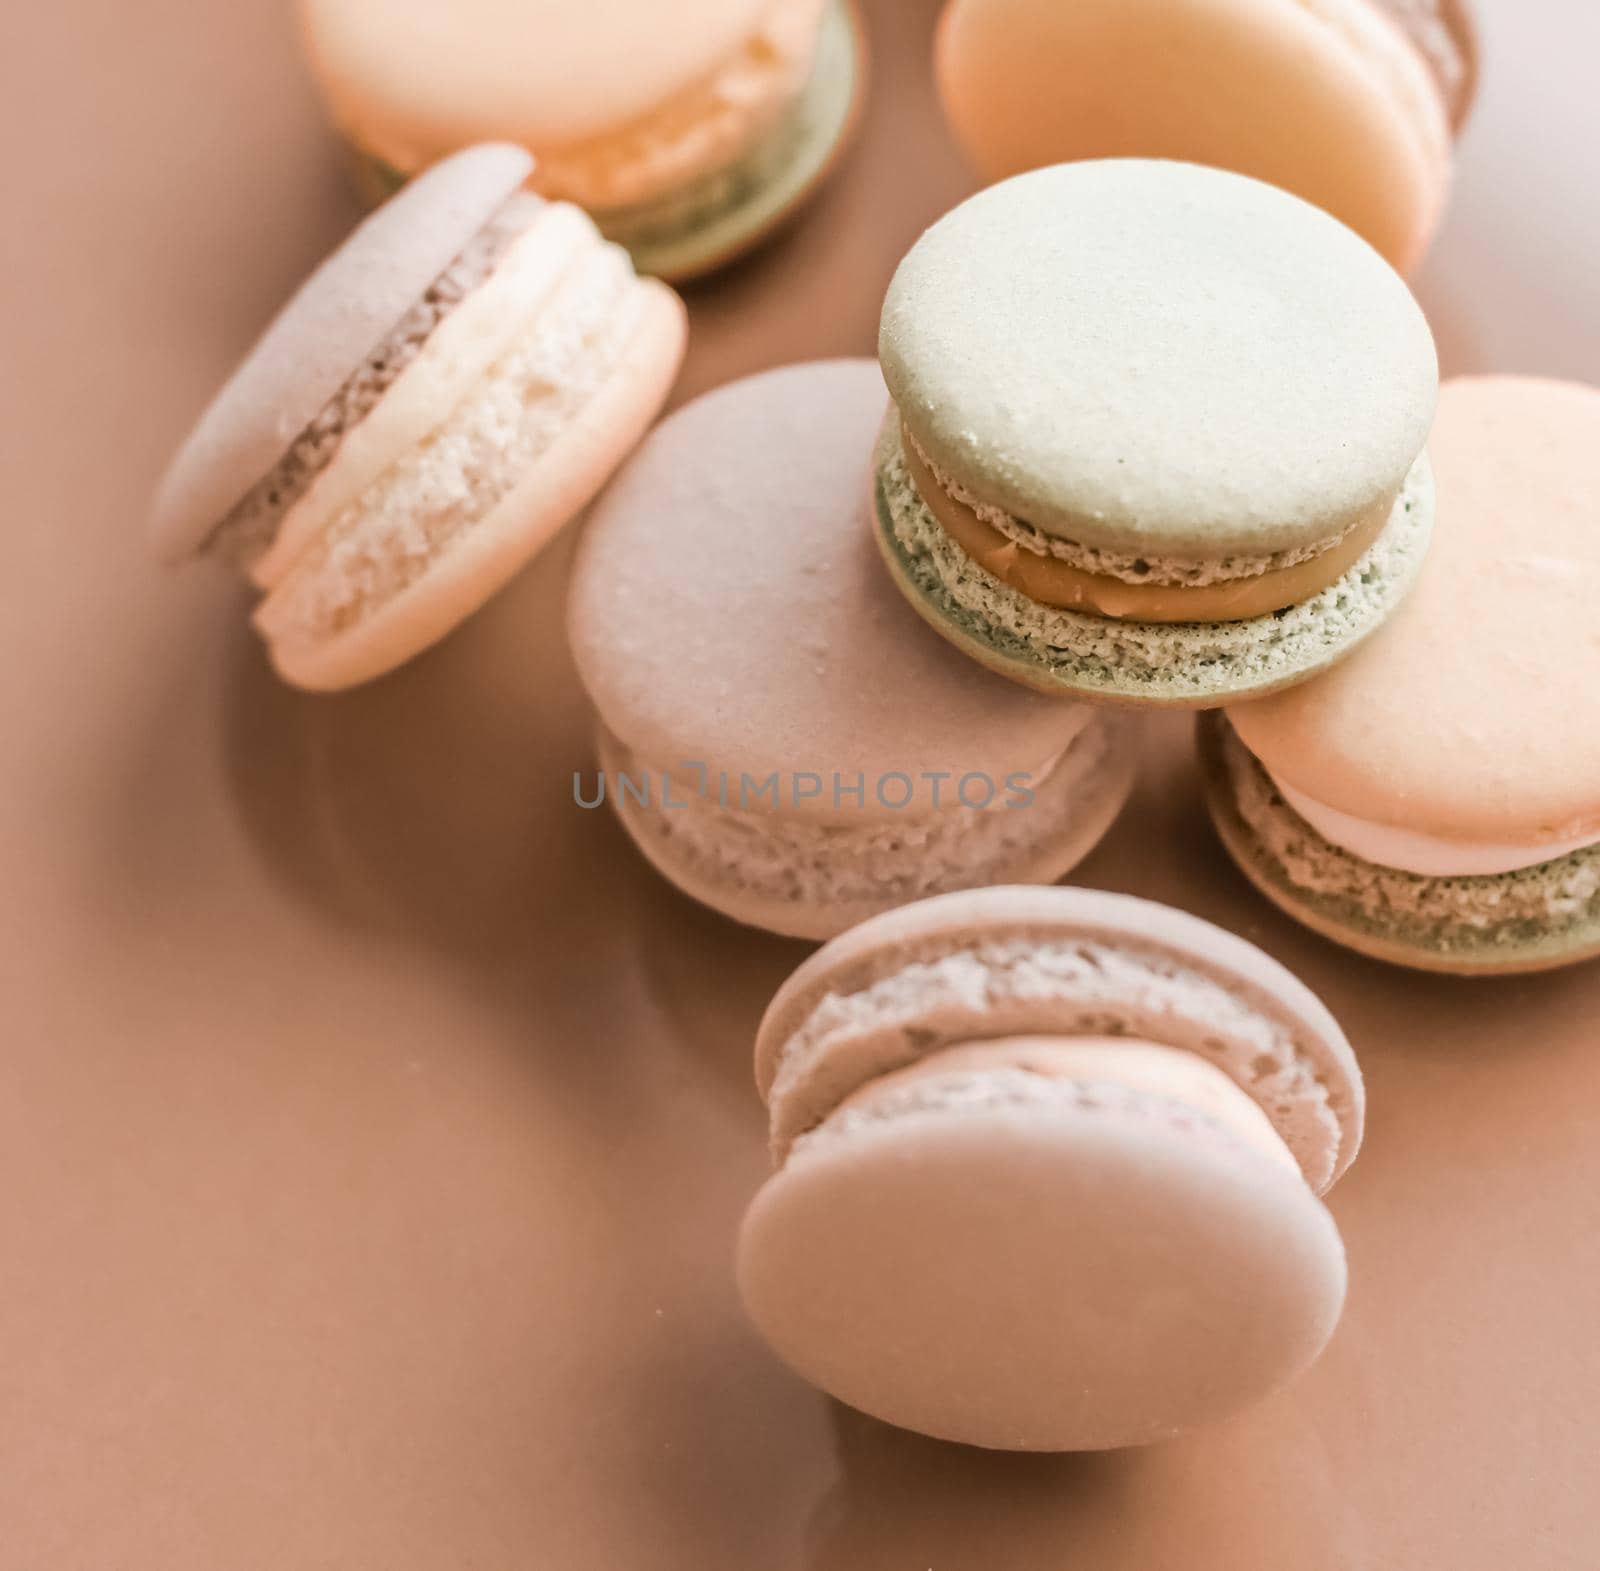 Pastry, bakery and branding concept - French macaroons on cream beige background, parisian chic cafe dessert, sweet food and cake macaron for luxury confectionery brand, holiday backdrop design